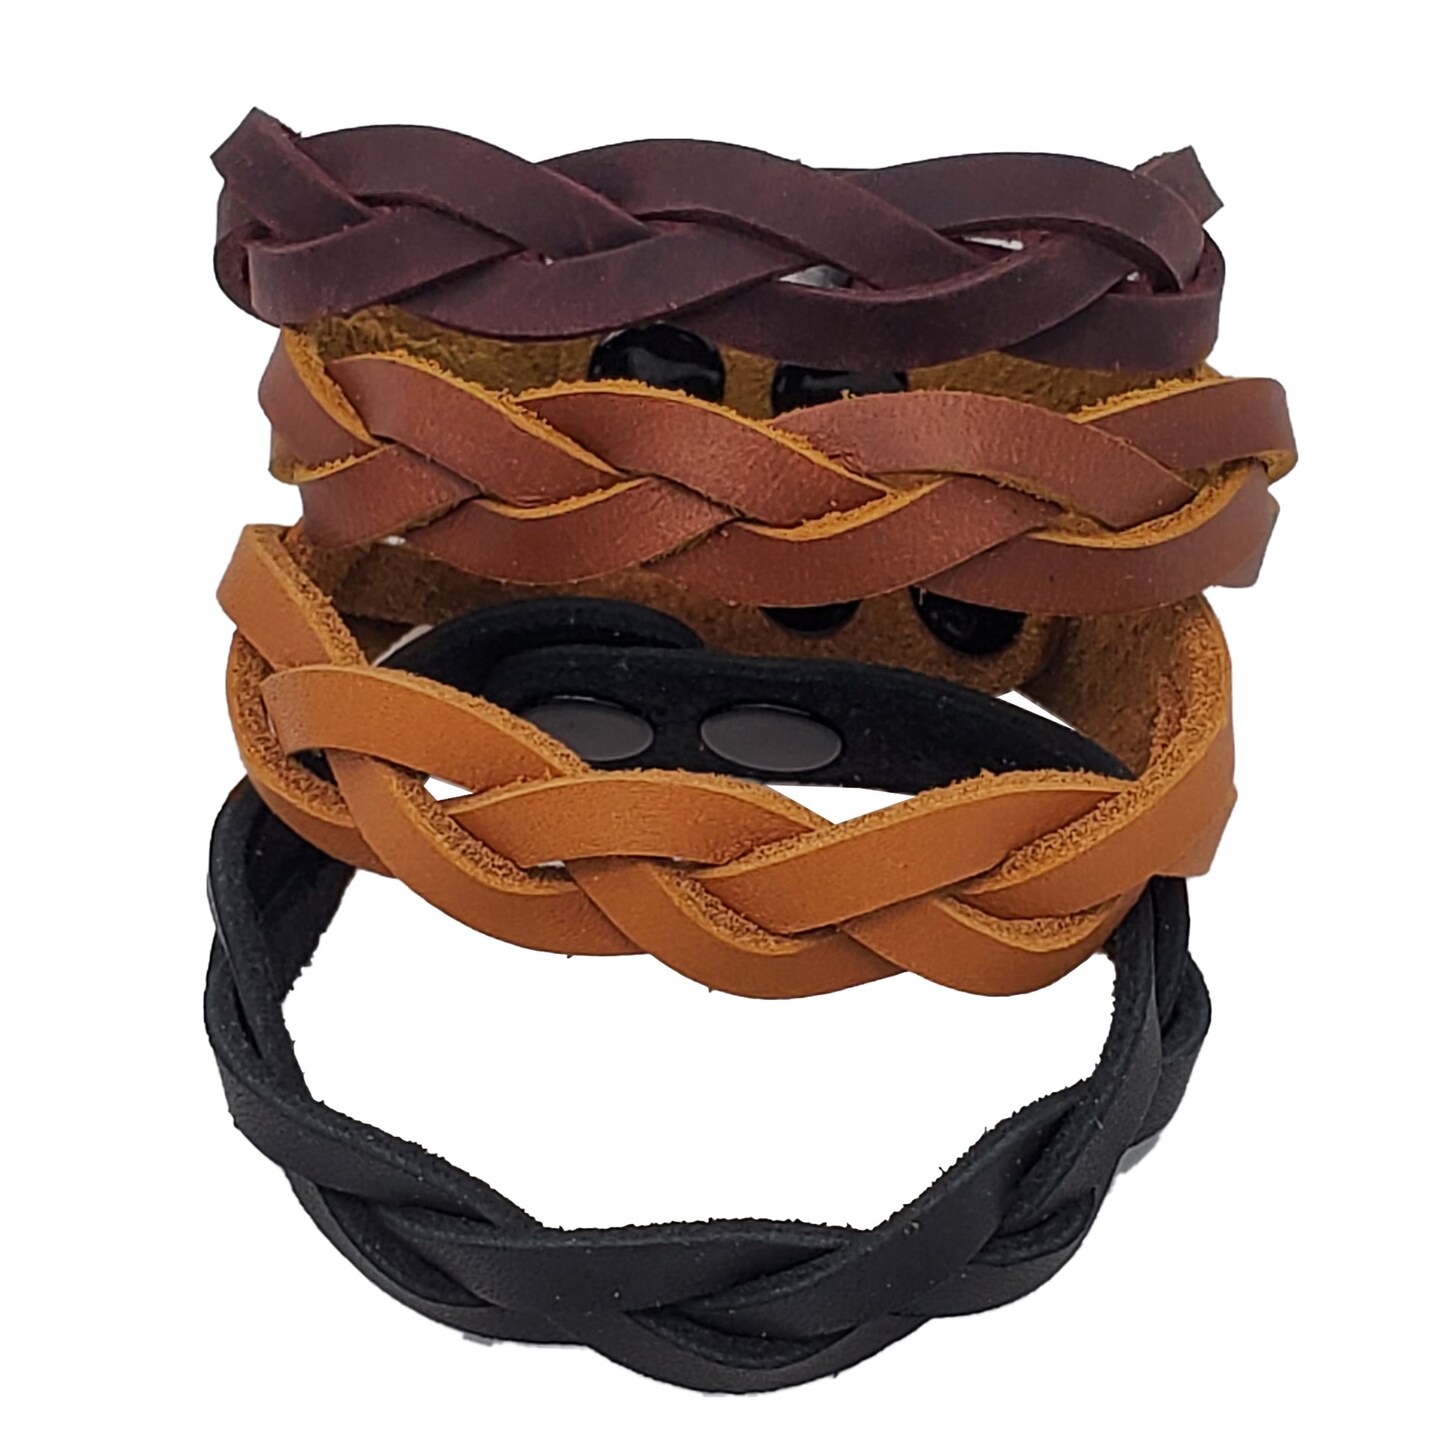 Mixed Colors Mystery Braid Leather Bracelets Kit - 8 Leather Bracelets Braiding Ready 2 of Each Color - Made in USA by Pitka Leather